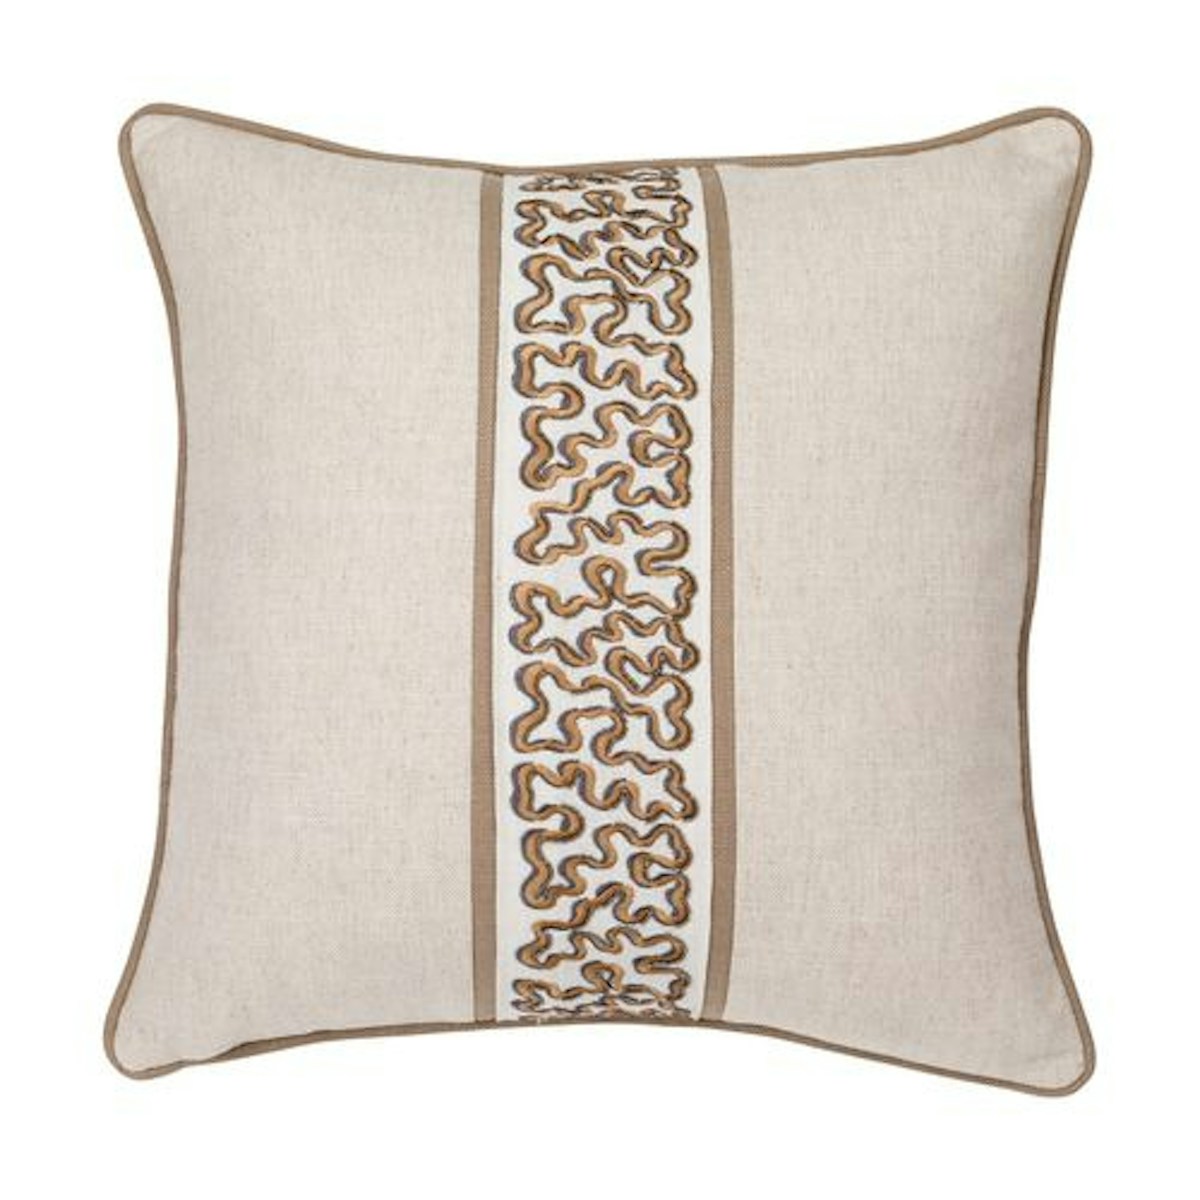 Taupe Fern Cushion - 9 Best Luxury Cushions to Buy for your Home - Style Guide - LuxDeco.com